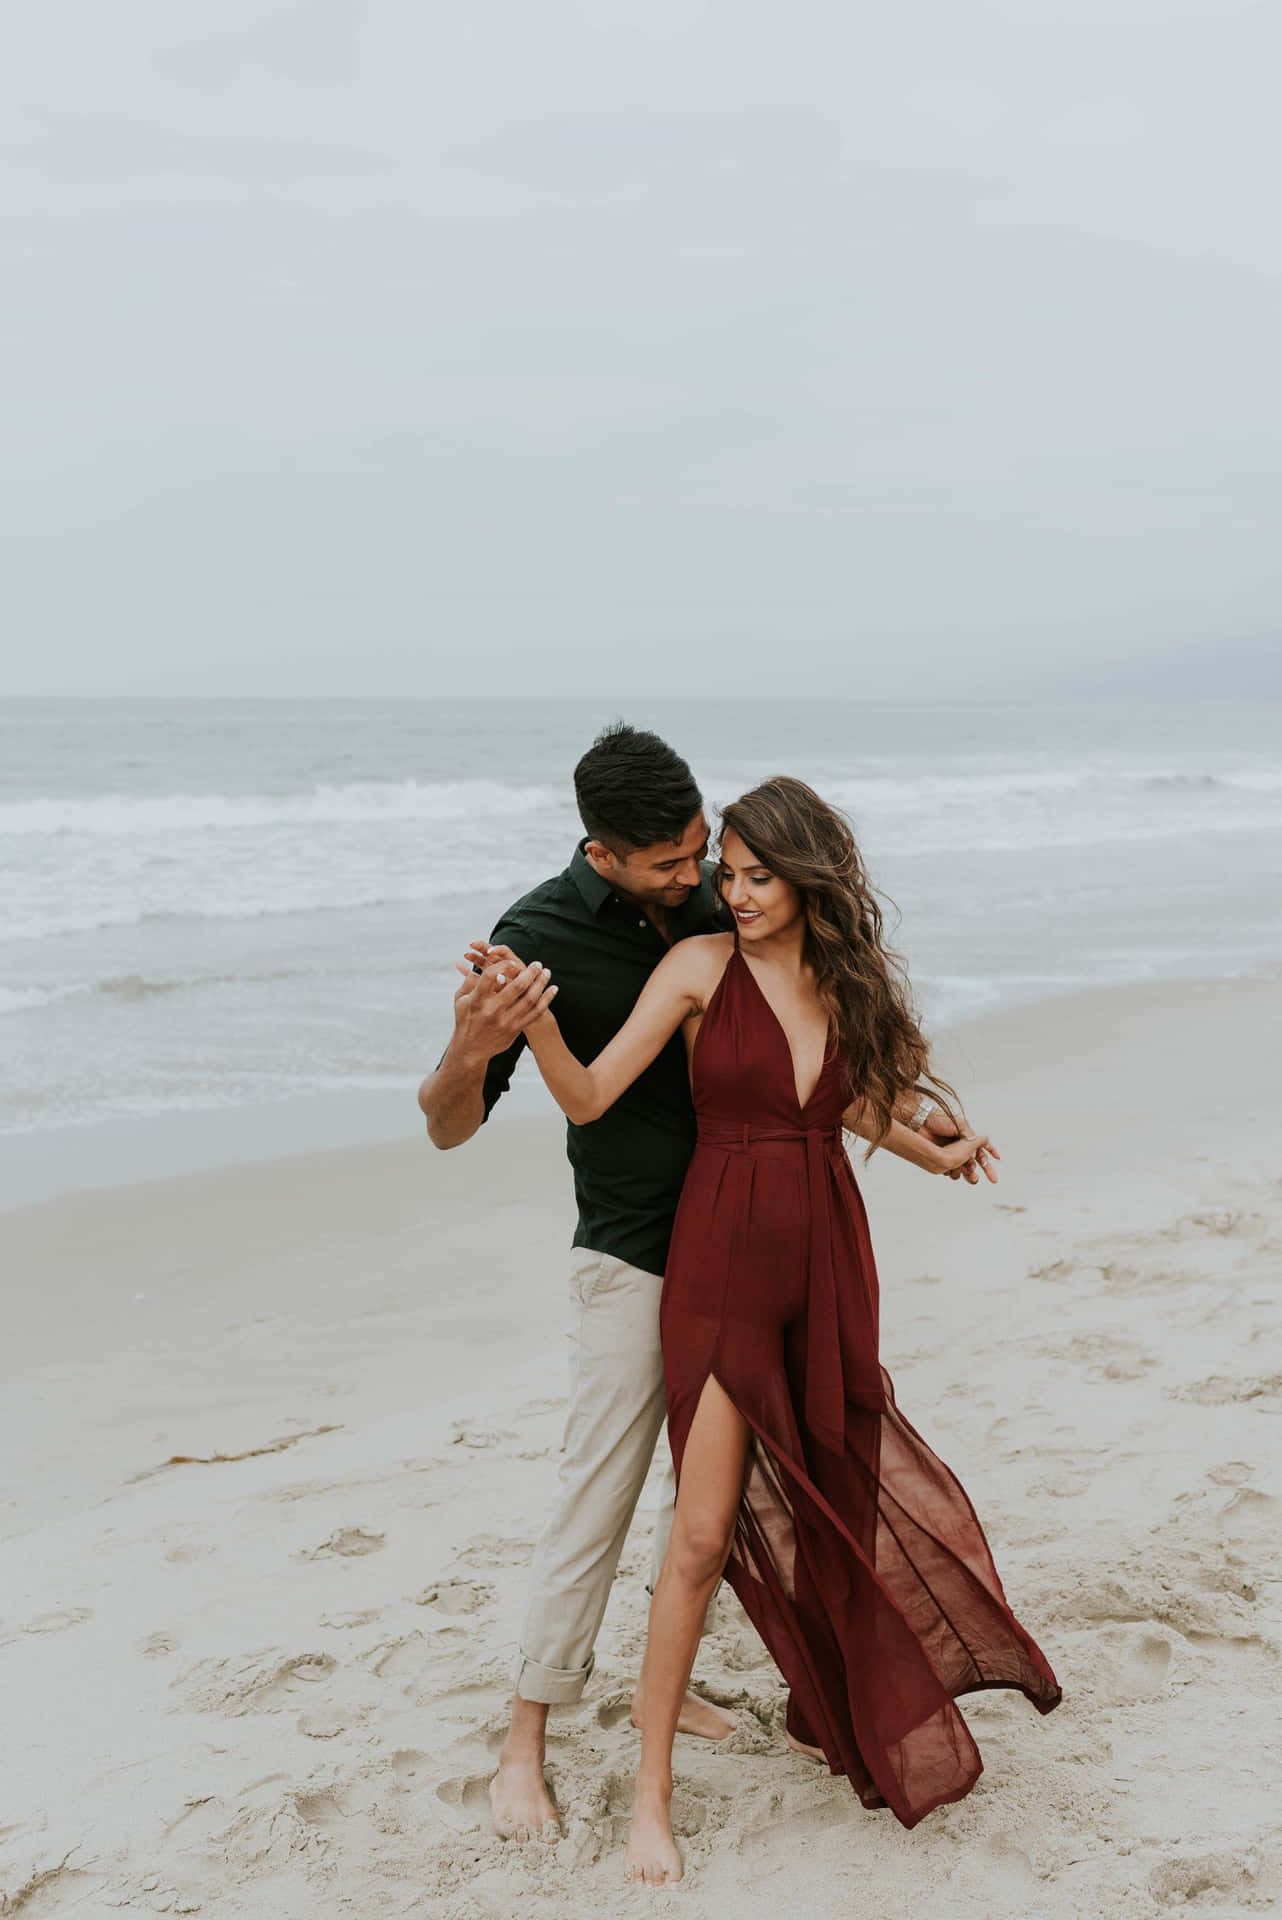 Couple At Beach Dancing On White Sand Picture